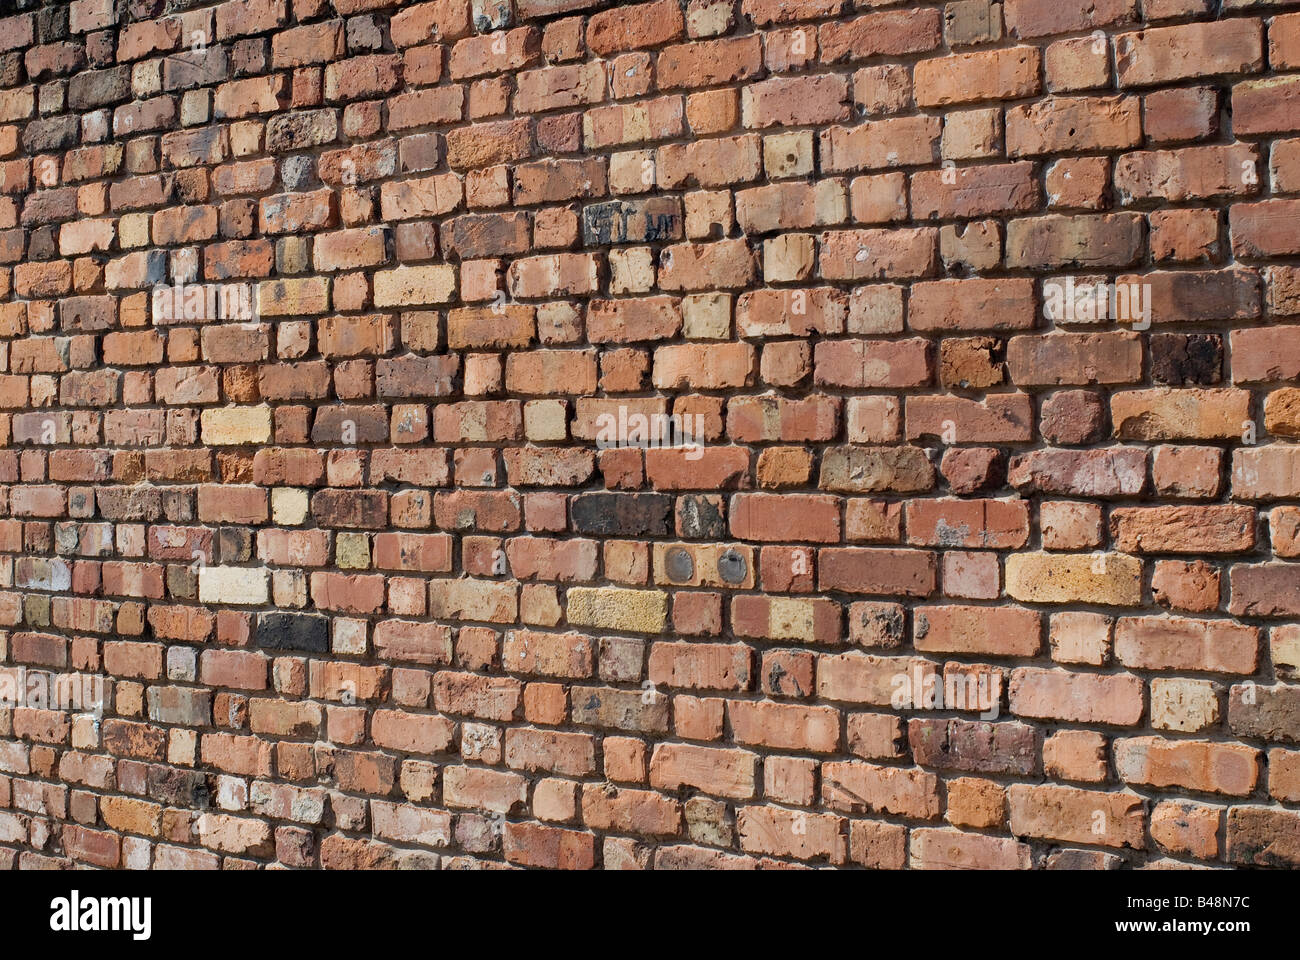 Wall made of red brick with a perspective view Stock Photo